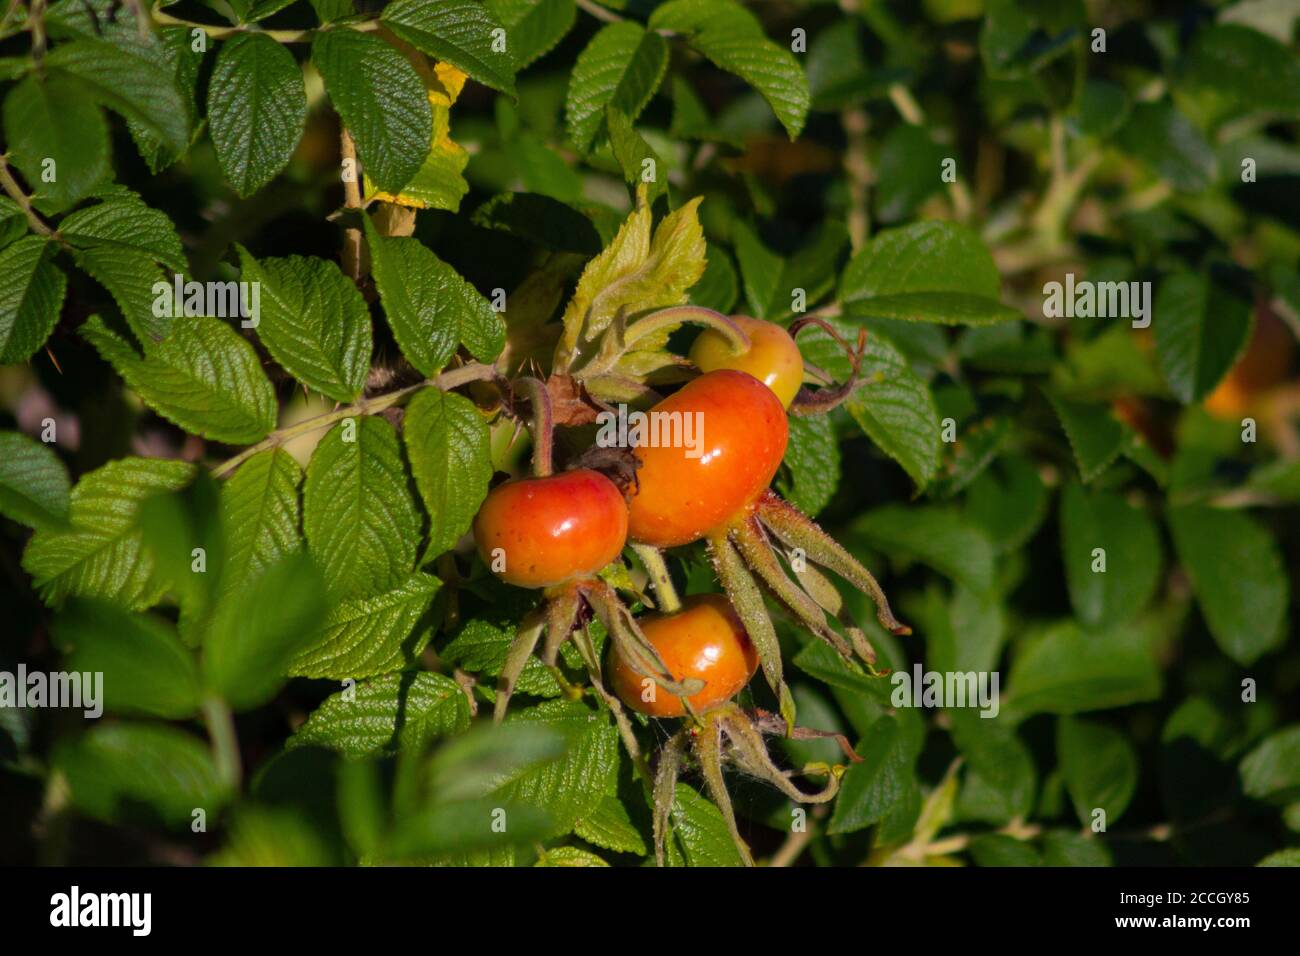 Rose hips, the fruit of a Salt Spray Rose plant, shine in the sunlight at Jamaica Bay National Wildlife Refuge. Stock Photo